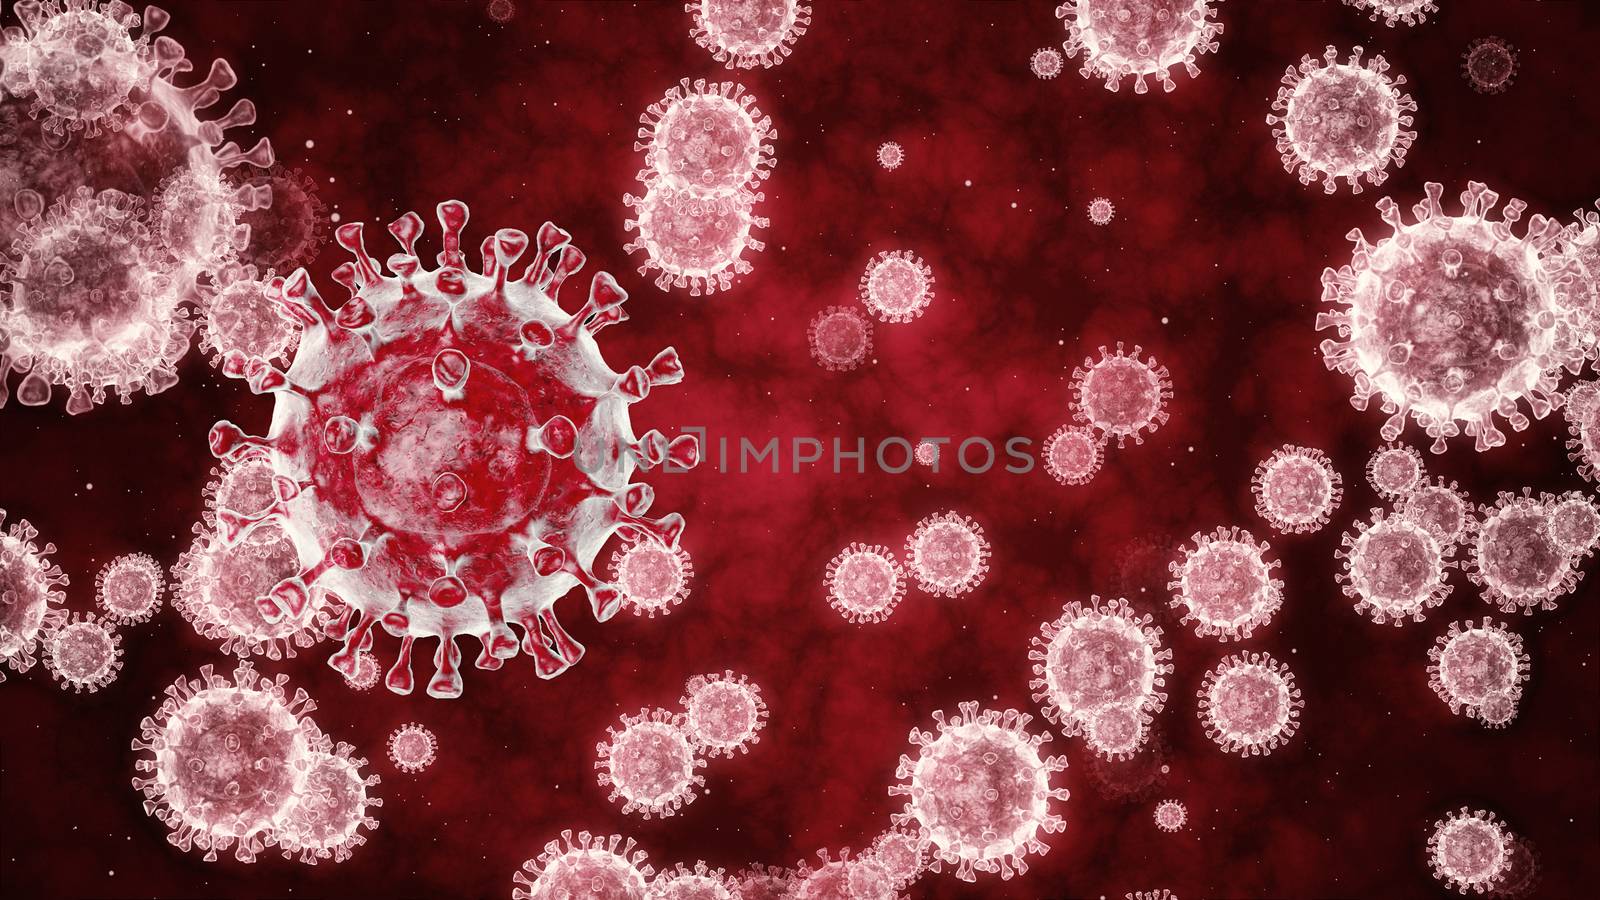 Coronavirus danger and public health risk disease and flu outbreak or coronaviruses influenza as dangerous viral strain case as a pandemic medical concept with dangerous cells as a 3D render.